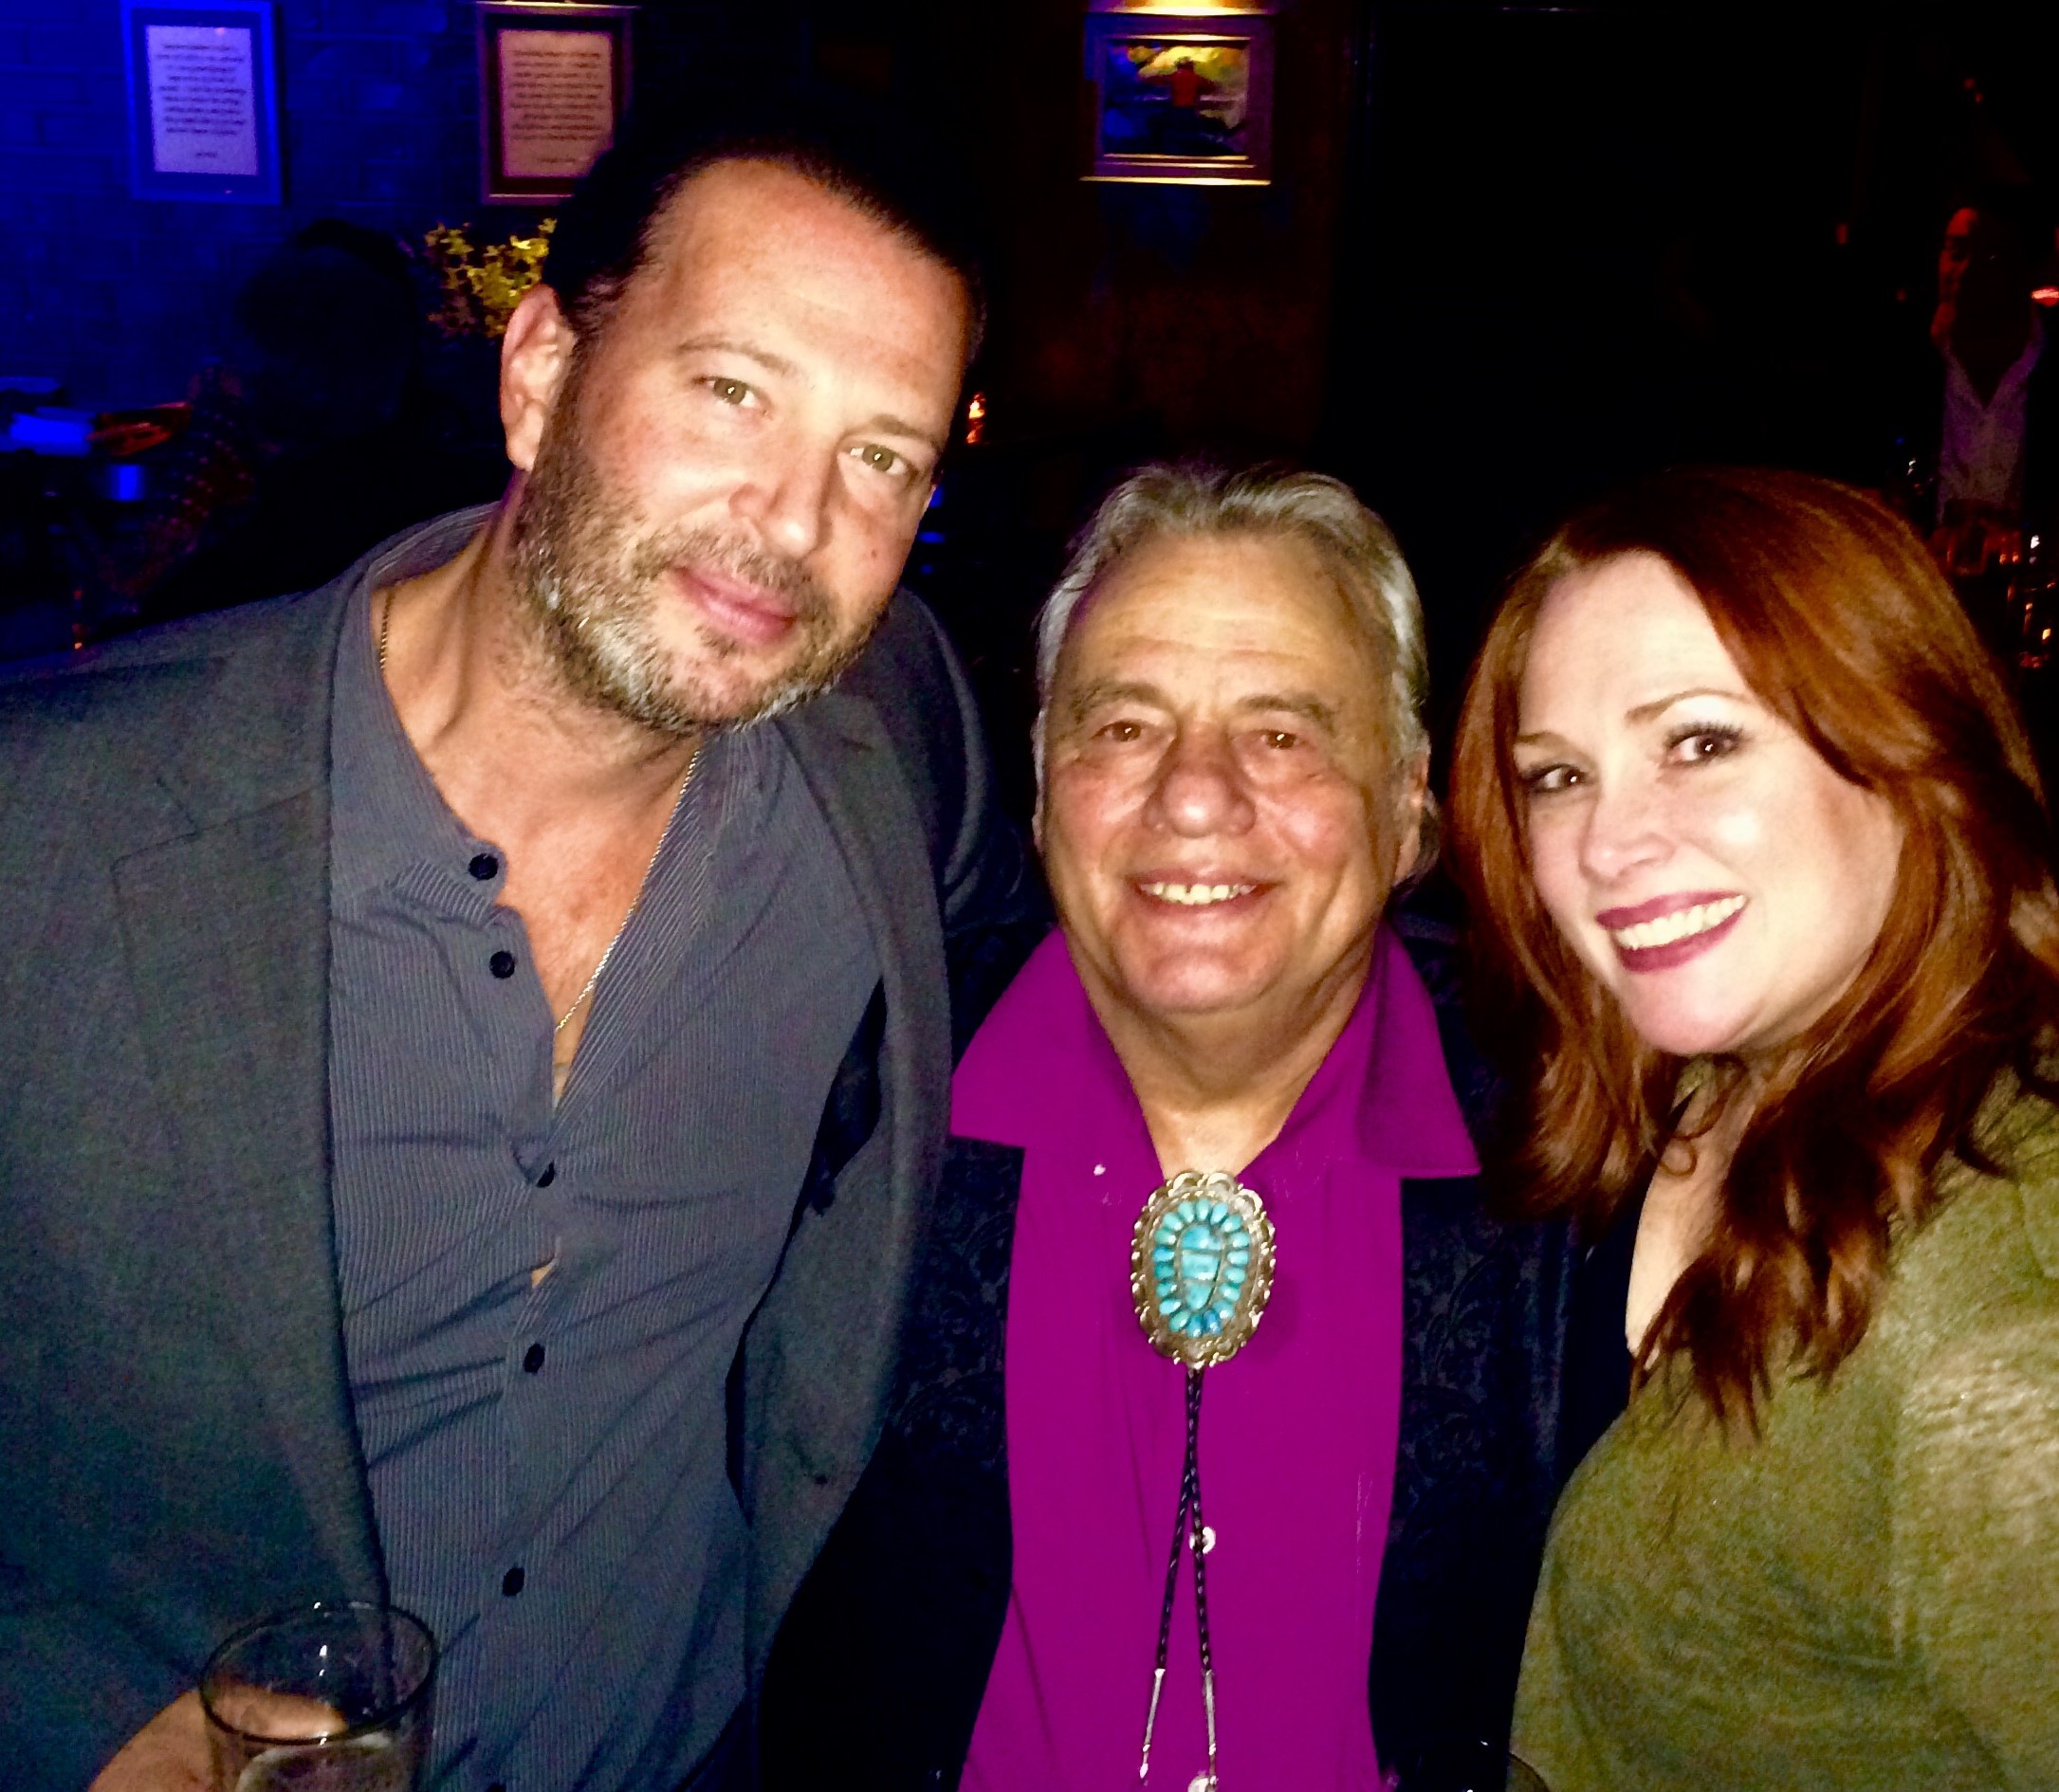 Actress Kerry McGann w/ Rascals front-man Eddie Brigati & actor/screenwriter Christian Keiber at the Cutting Room for the Renegade Theatre show NYC.